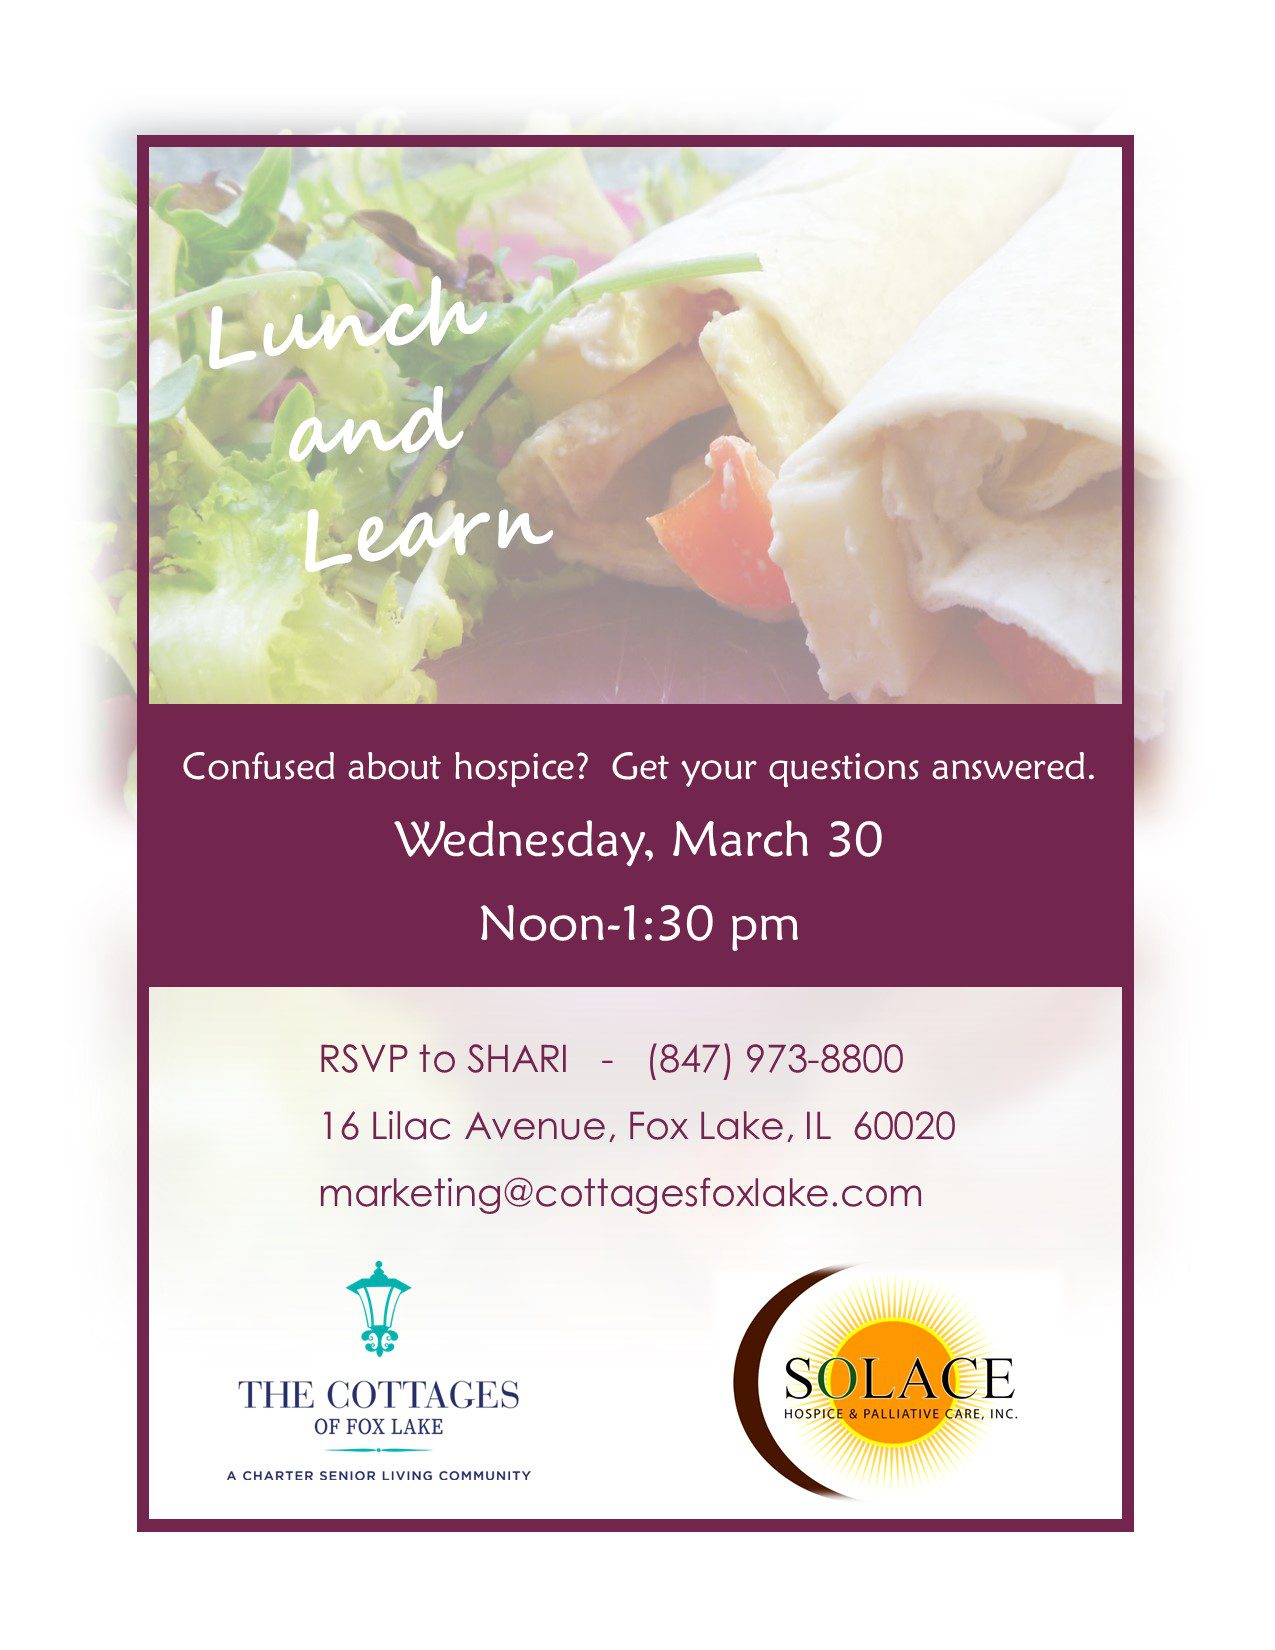 Cottages of Fox Lake - Assisted Living and Memory Care - Lunch and Learn